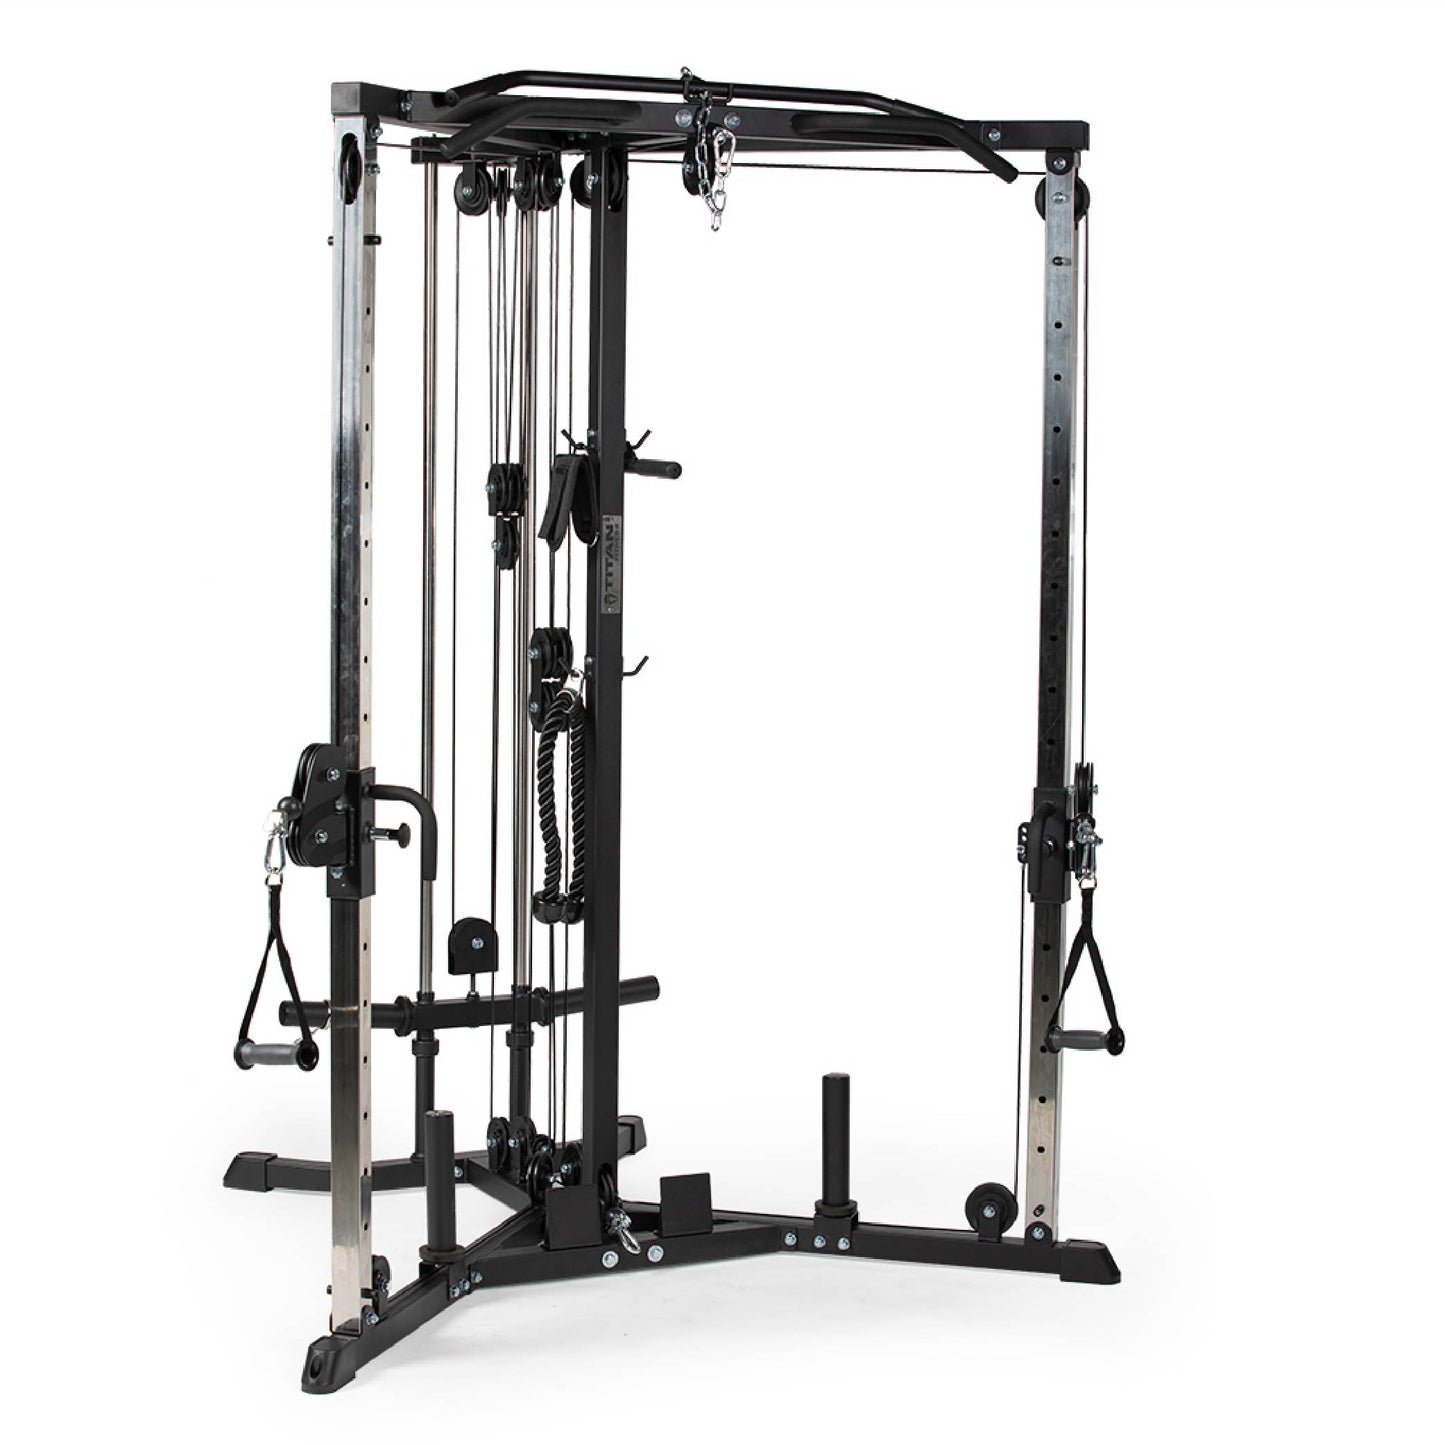 Plate Loaded Functional Trainer - view 1